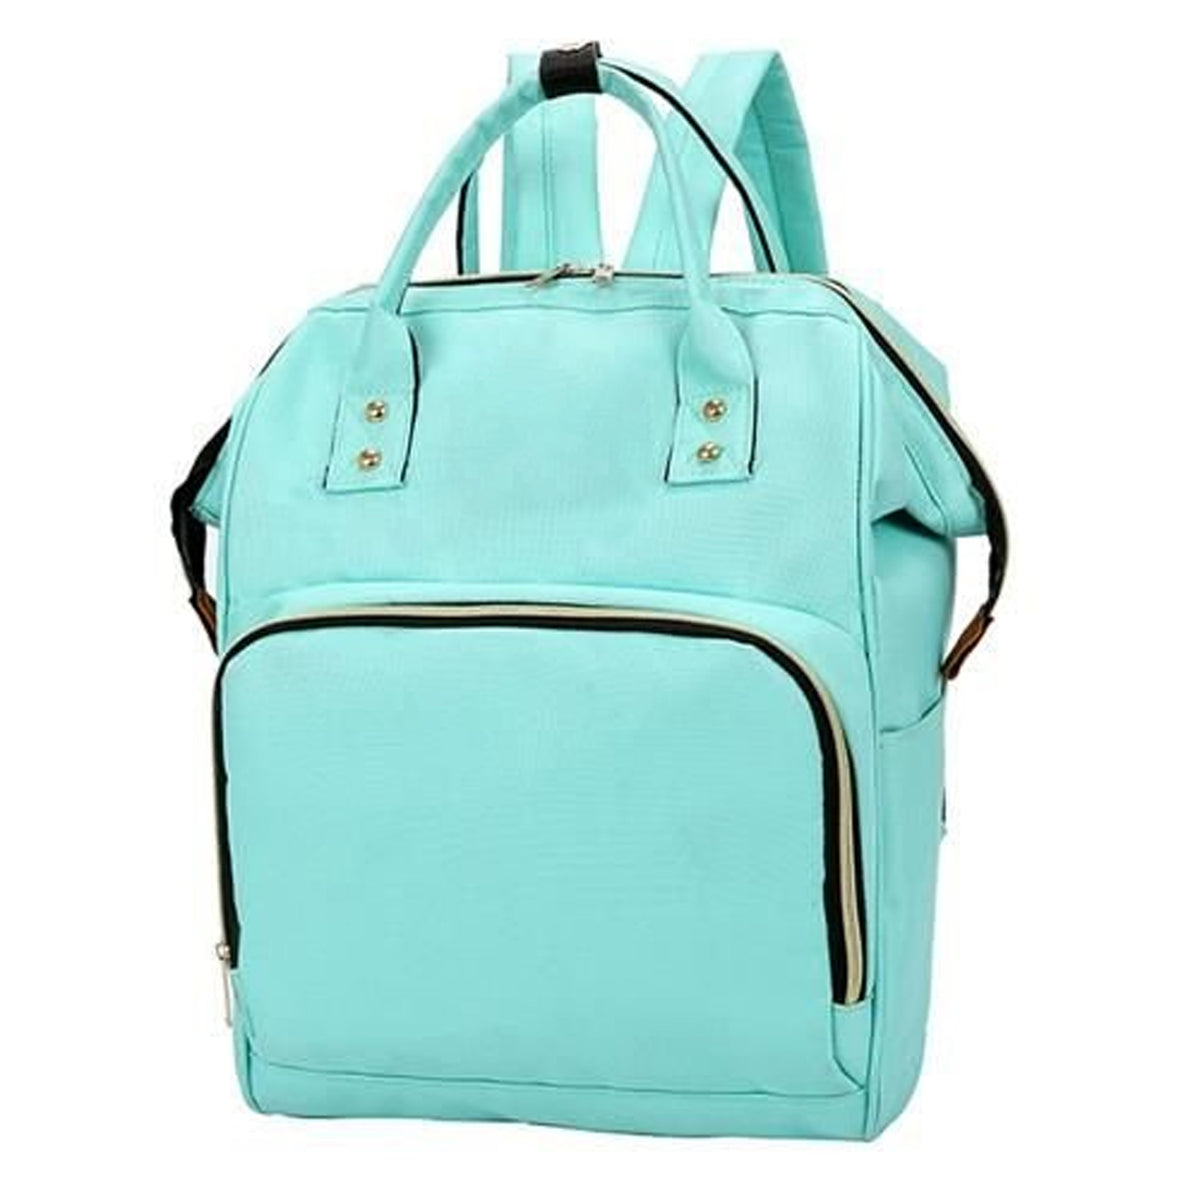 Baby Diaper Bag, Mothers Maternity Bags for Travel - Green